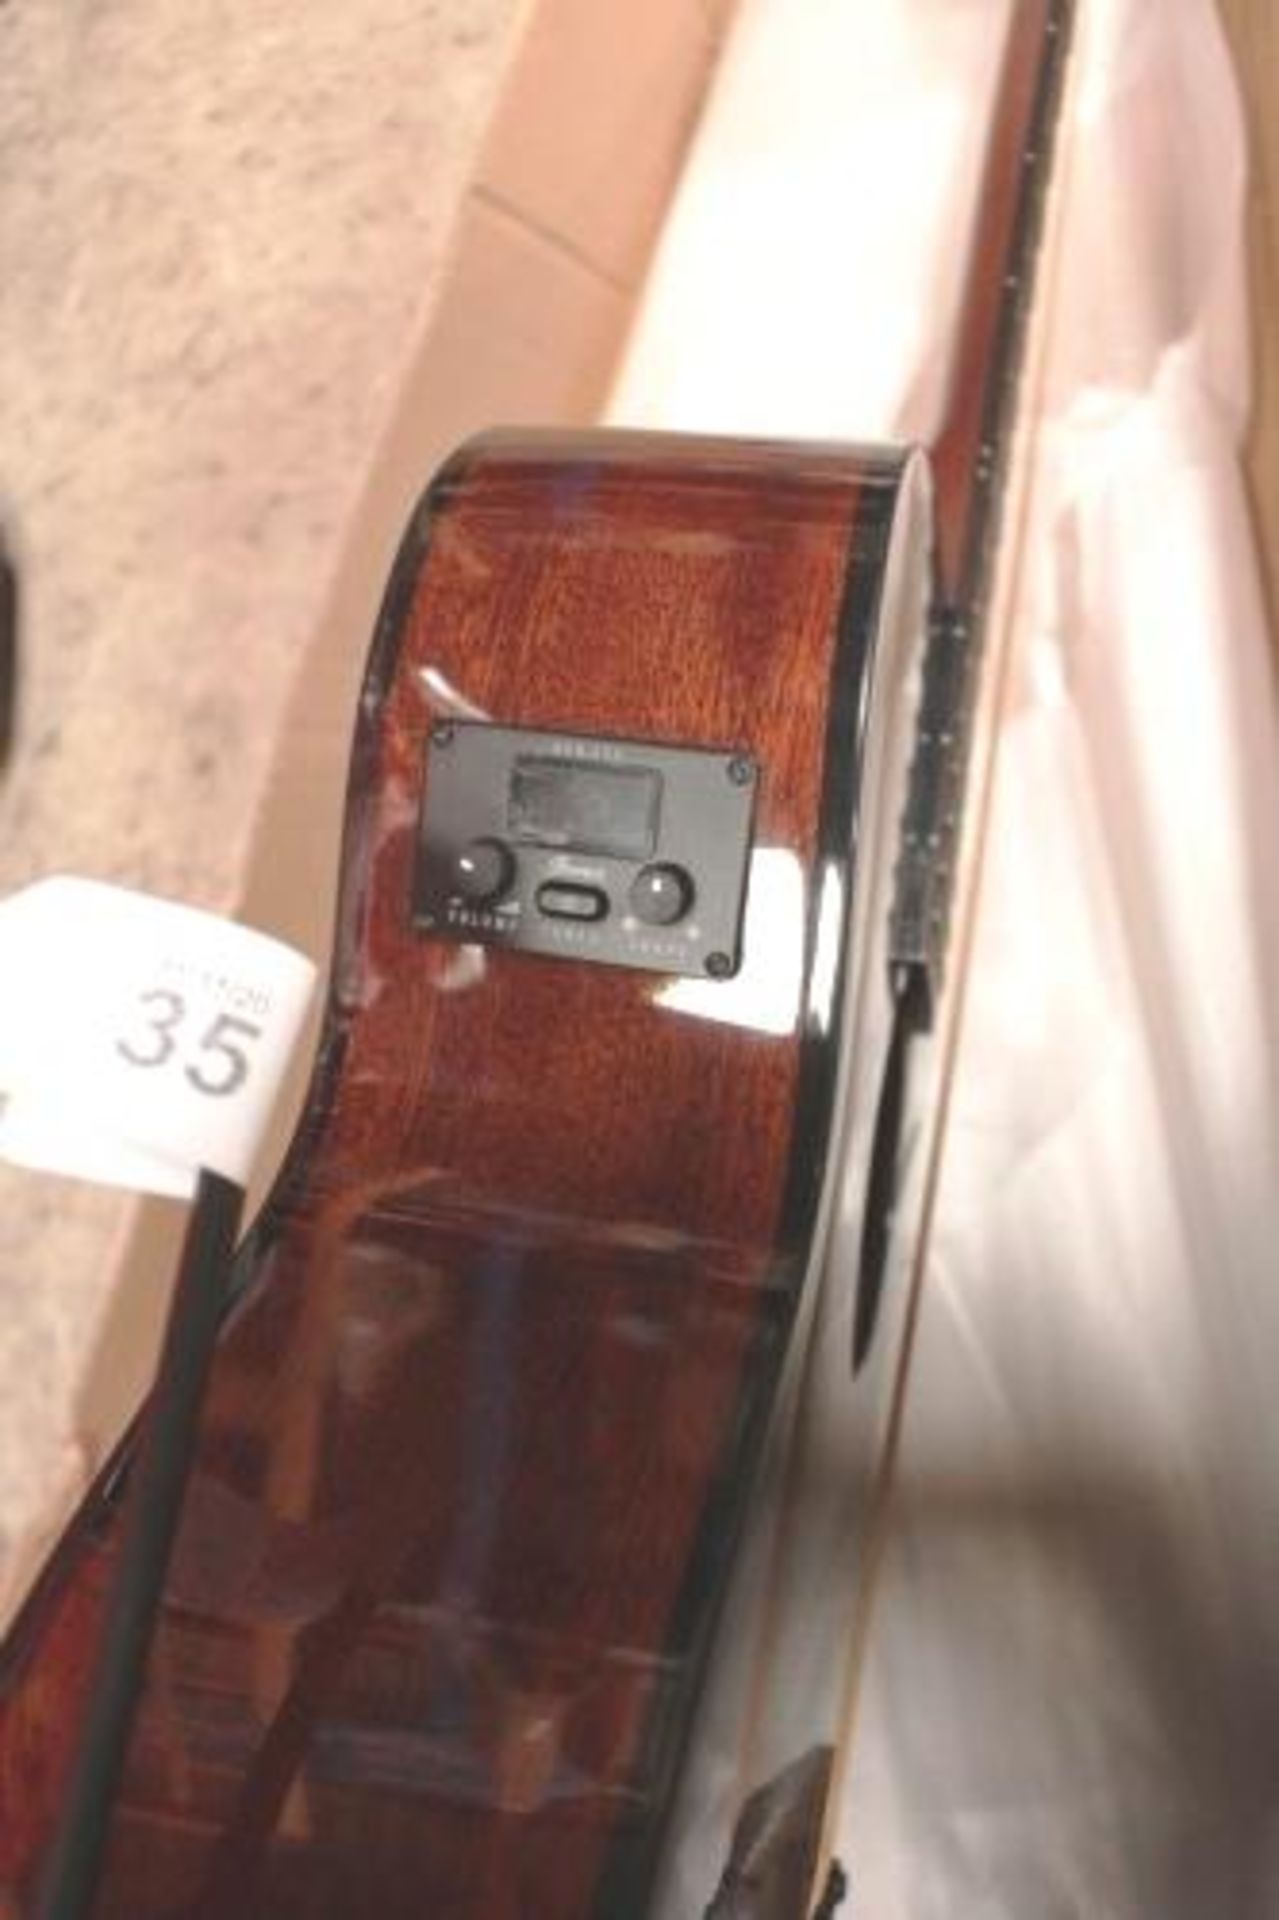 Ibanez AEG50-IBH acoustic guitar with broken neck - In box - Image 4 of 5